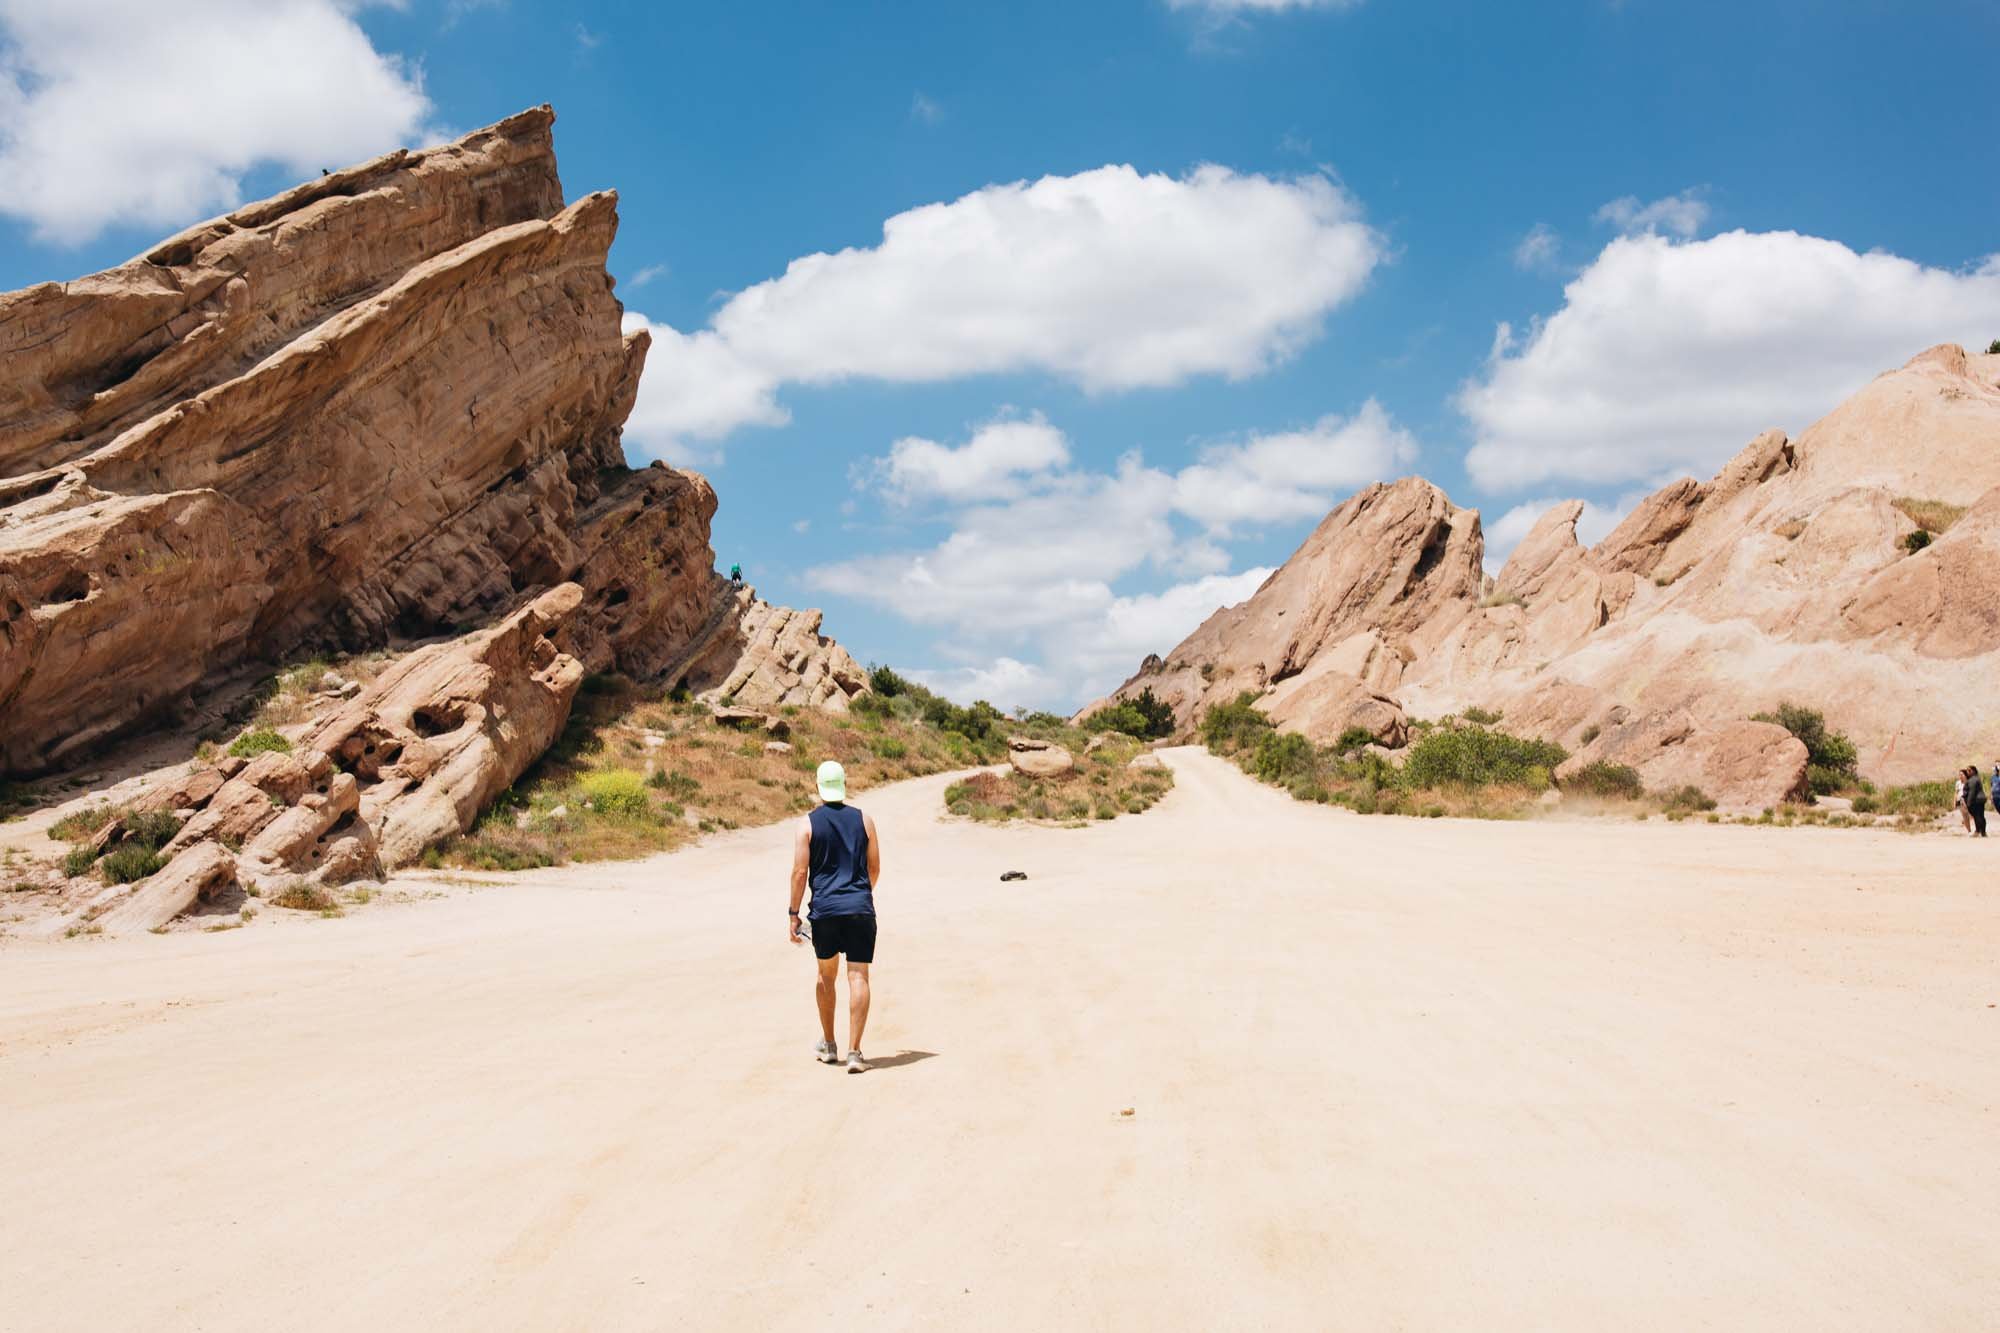 Vasquez Rocks: Where Nature and Hollywood Collide on the Hiking Trails